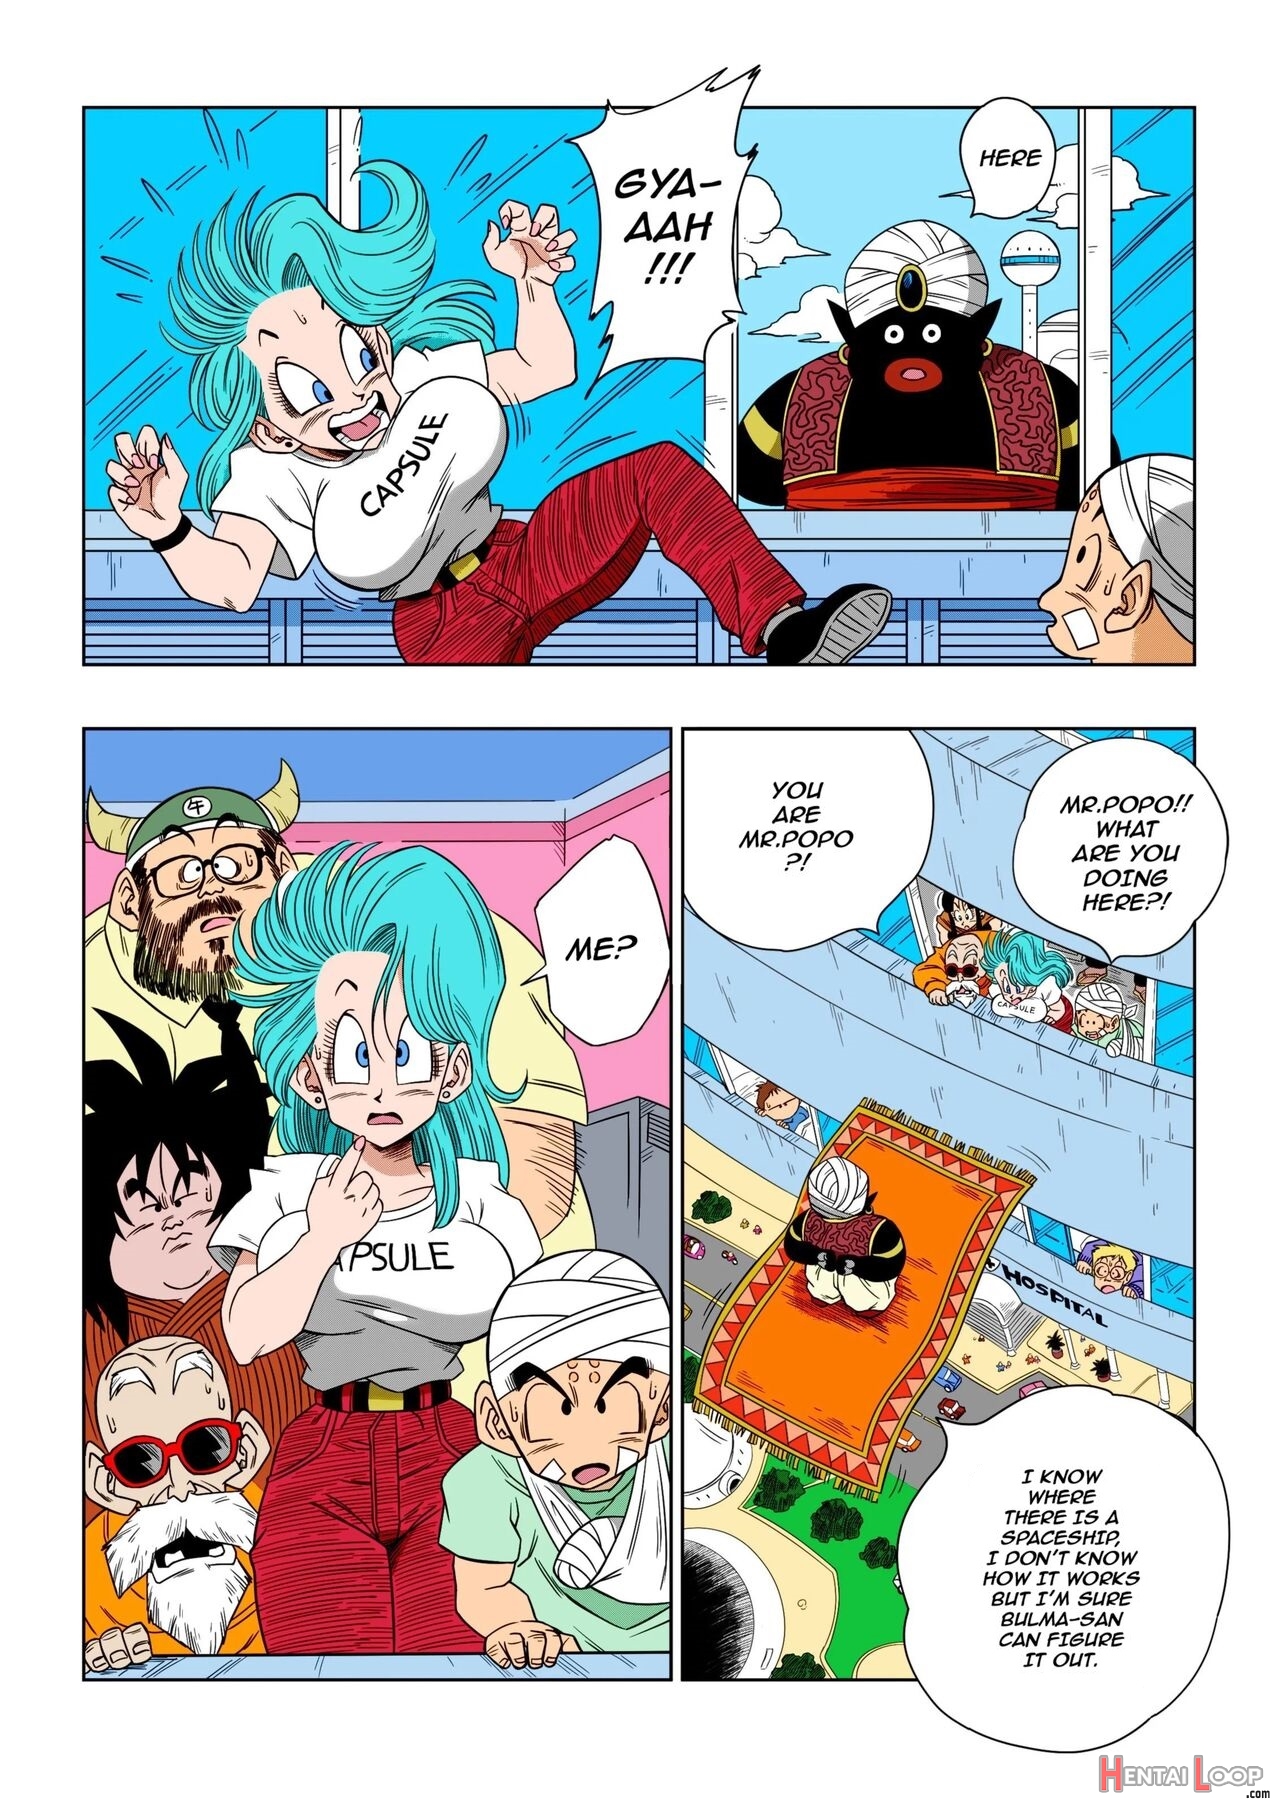 Dagon Ball - Bulma Meets Mr. Popo - Sex Inside The Mysterious Spaceship page 2